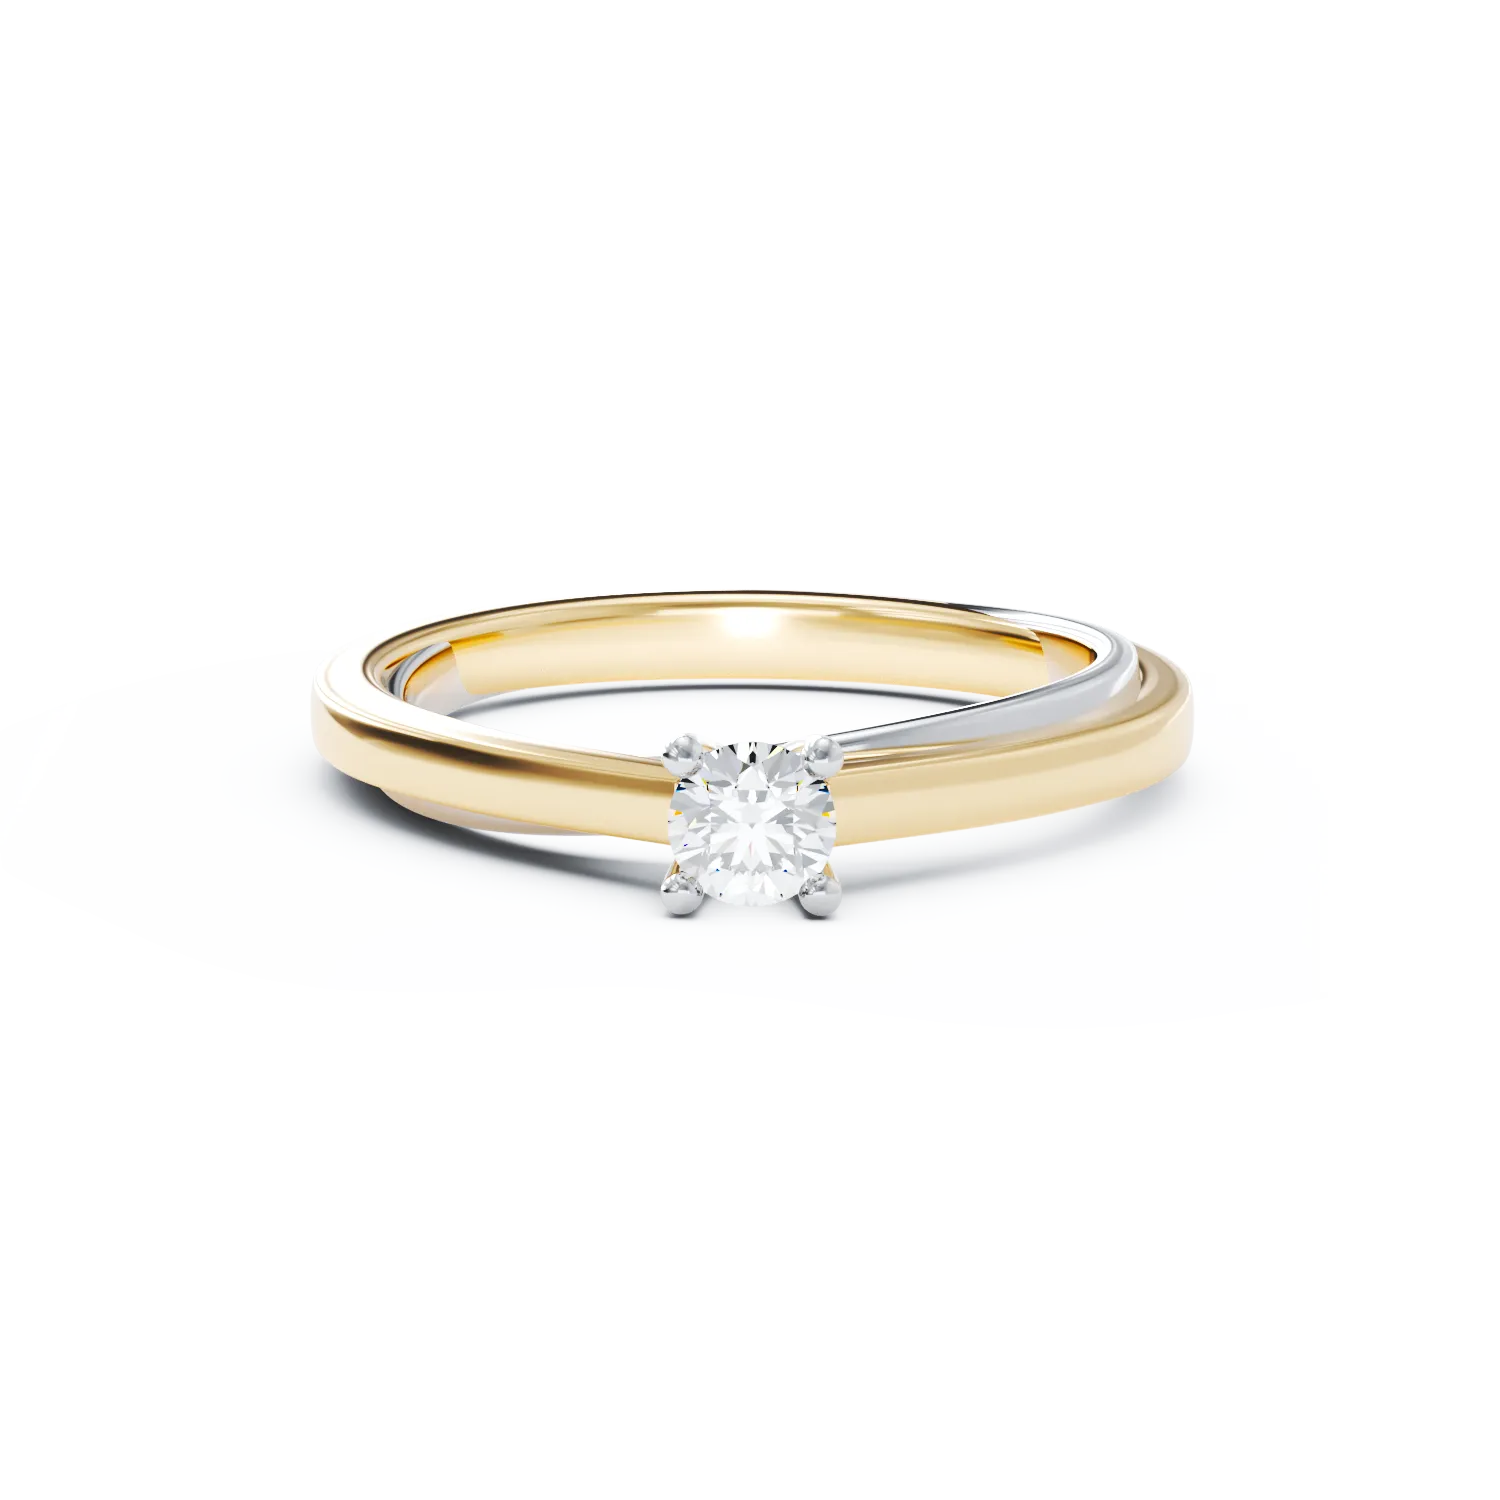 18K white-yellow gold engagement ring with 0.19ct diamond